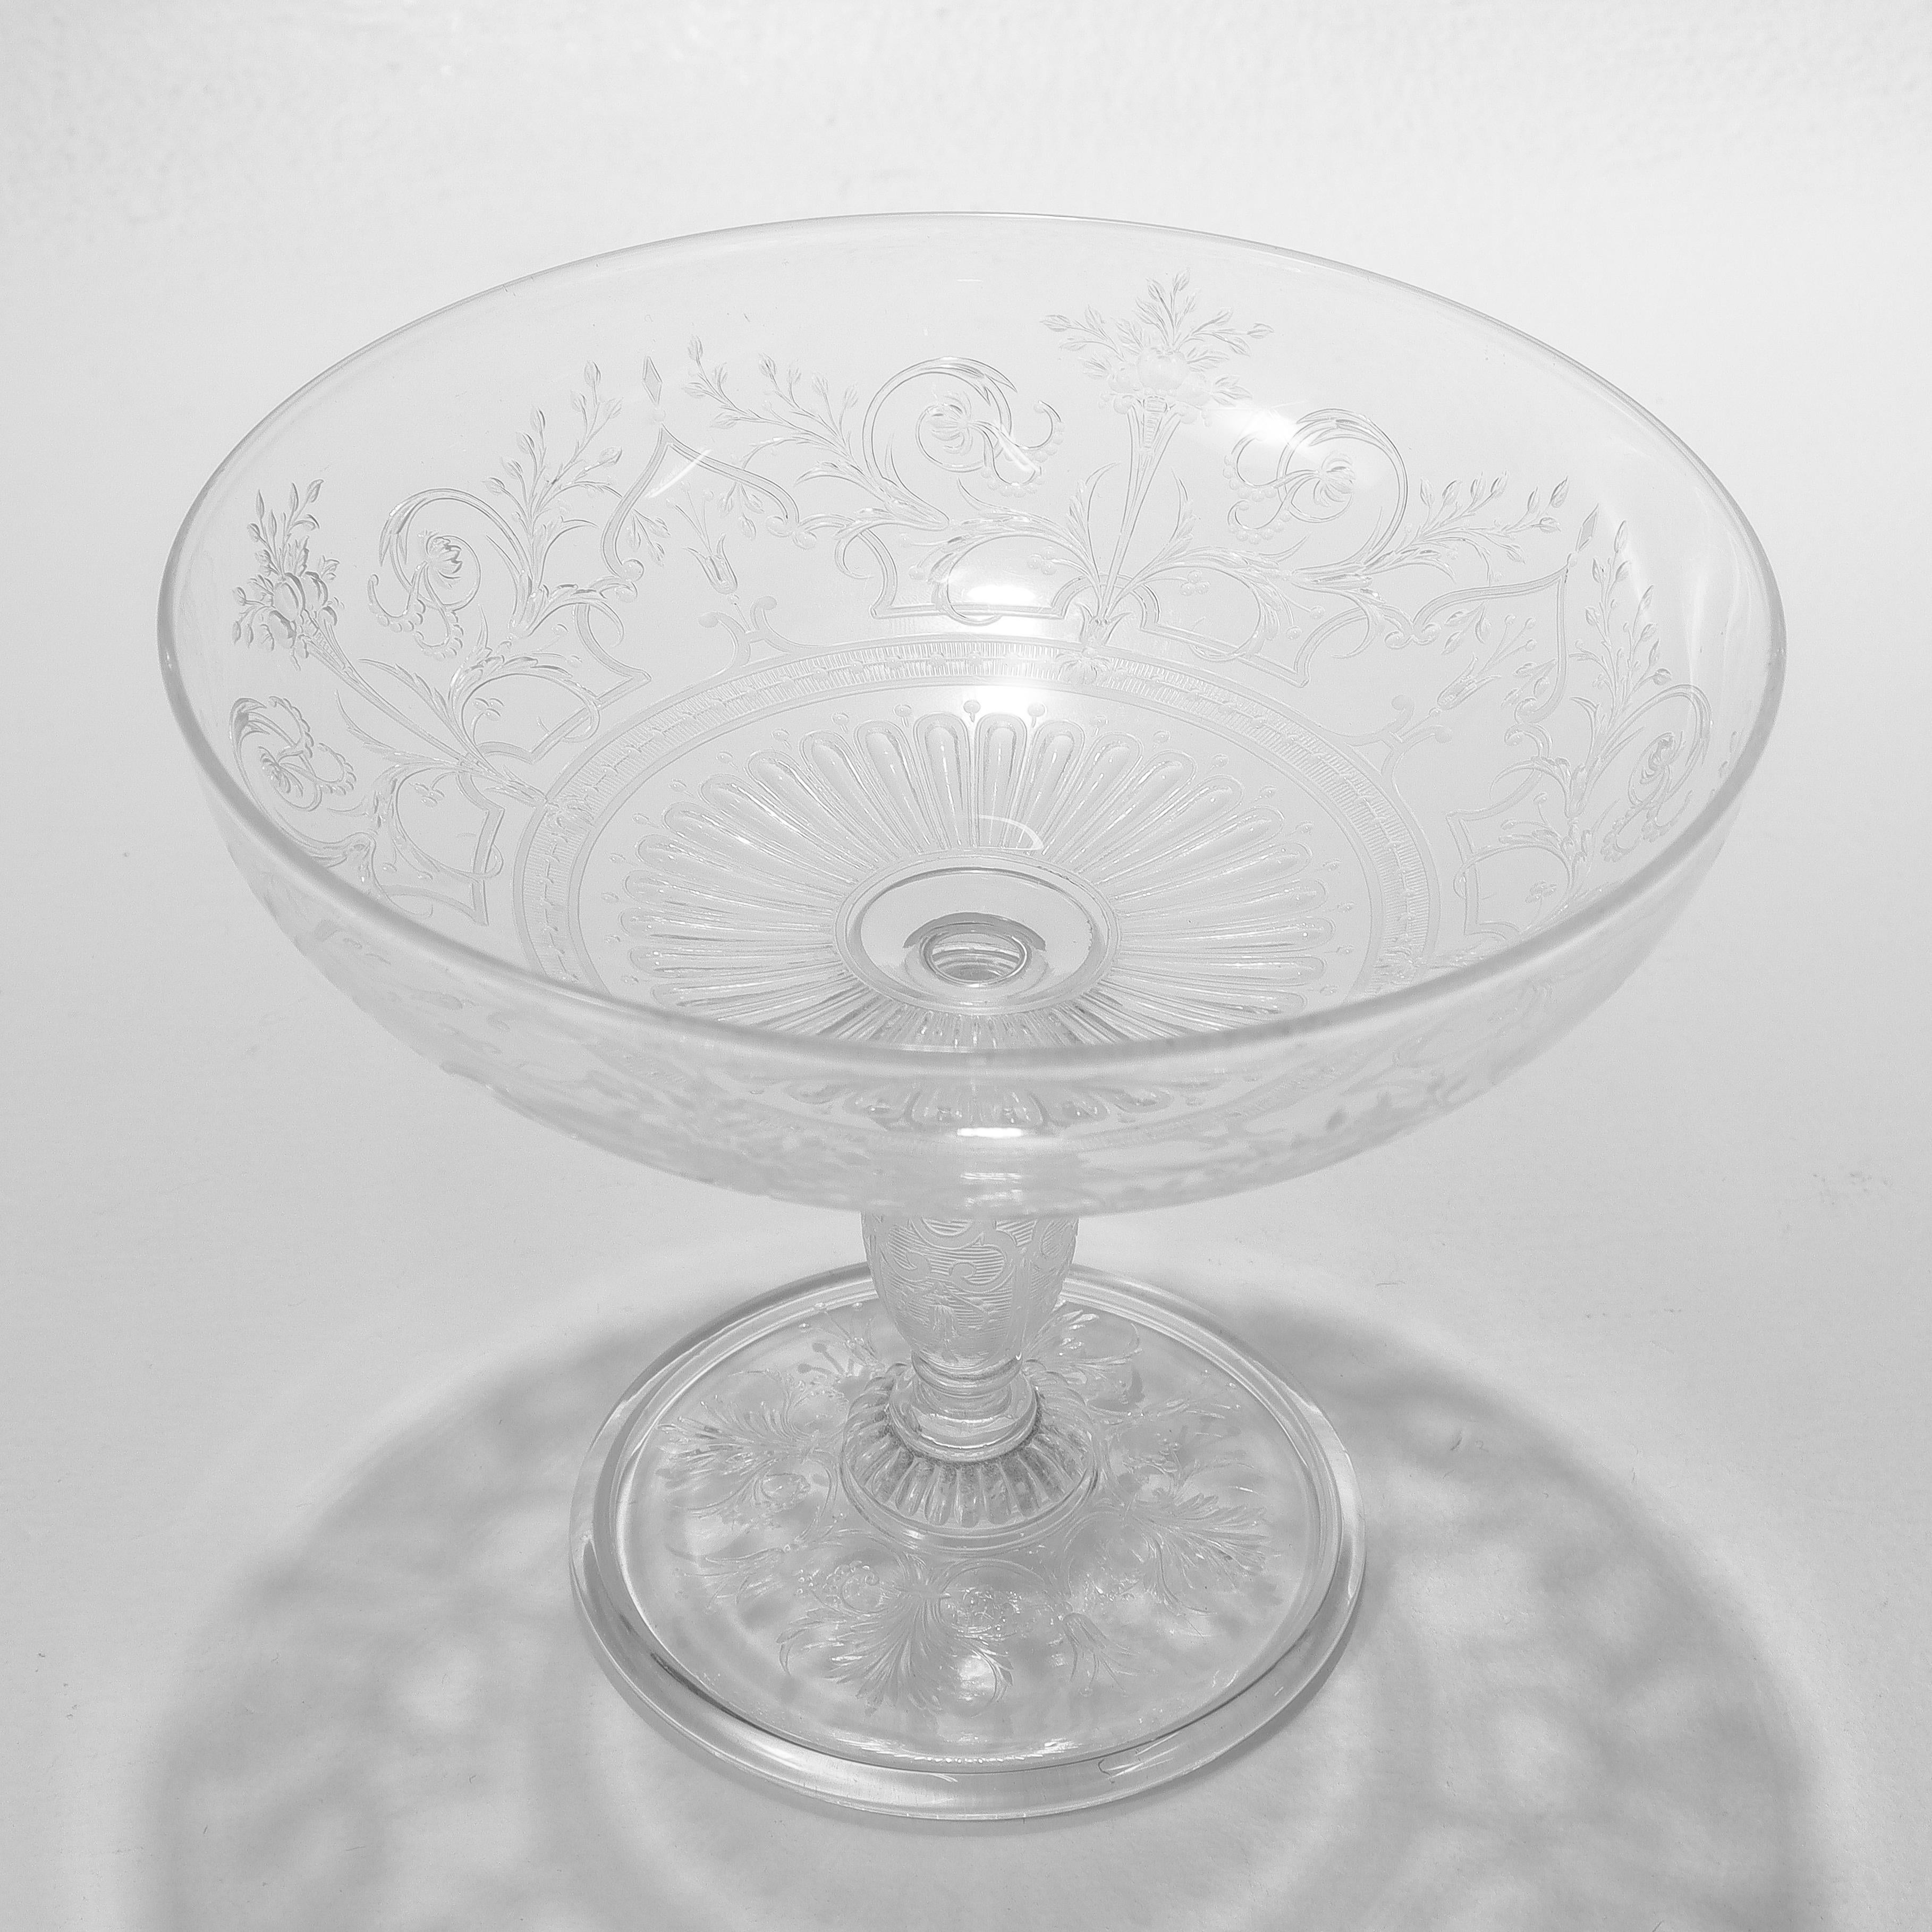 Antique Stourbridge Etched & Engraved Glass Lidded Compote or Tazza For Sale 4